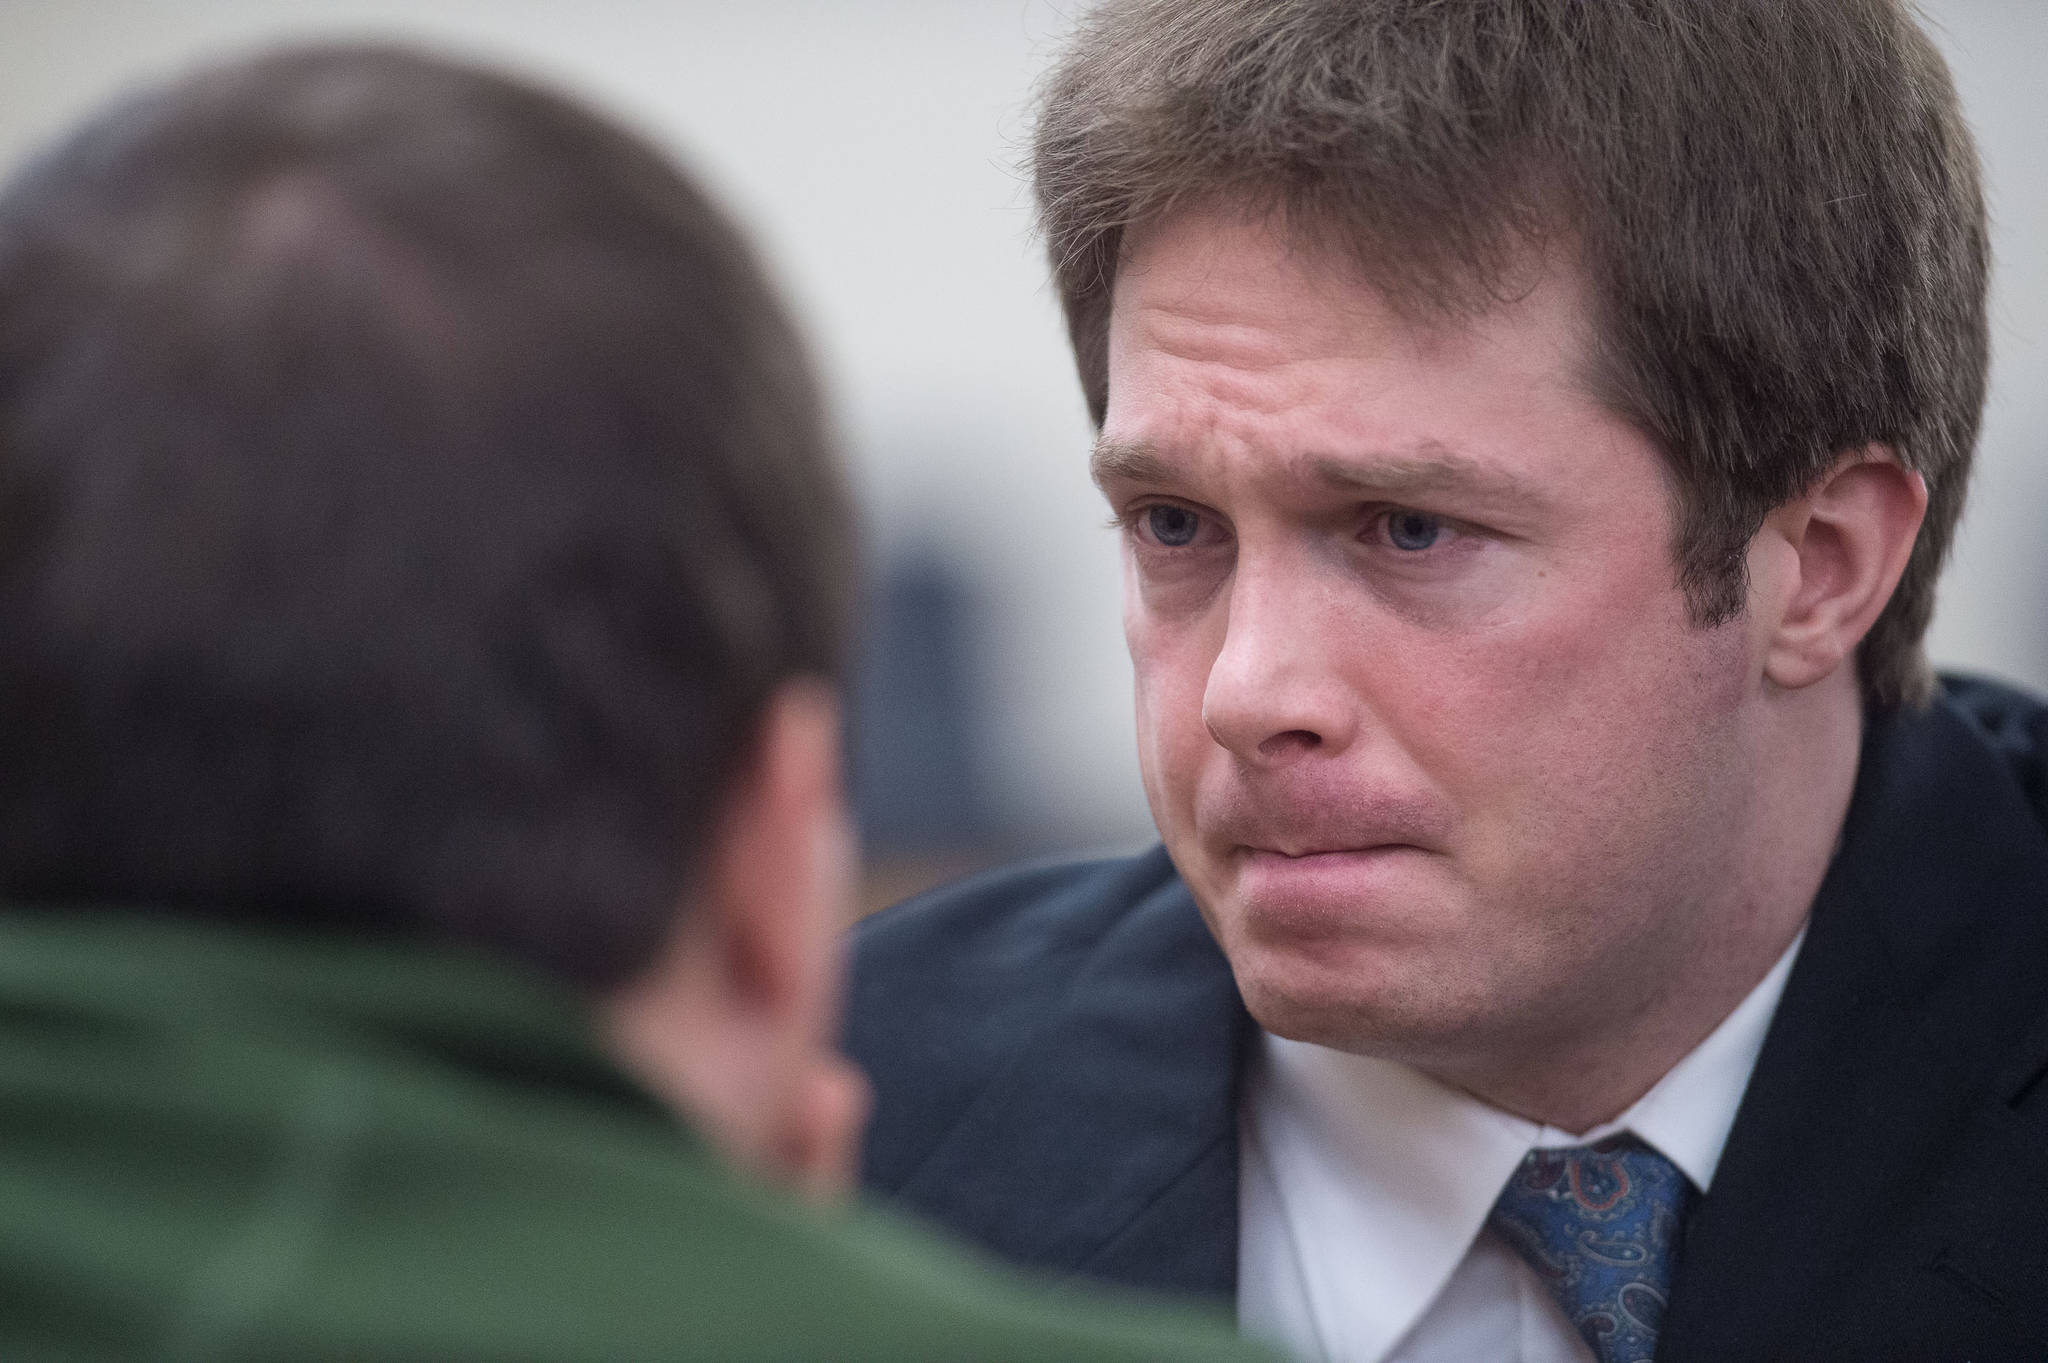 Christopher Strawn, right, confers with criminal defense attorney Nicholas Polasky during his trial in Juneau Superior Court on Monday, Oct. 16, 2017. Strawn, 34, was found guilty of first-degree and second-degree murder, manslaughter, criminally negligent homicide and third-degree assault in the shooting death of Brandon Cook in October 2015. (Michael Penn | Juneau Empire File)